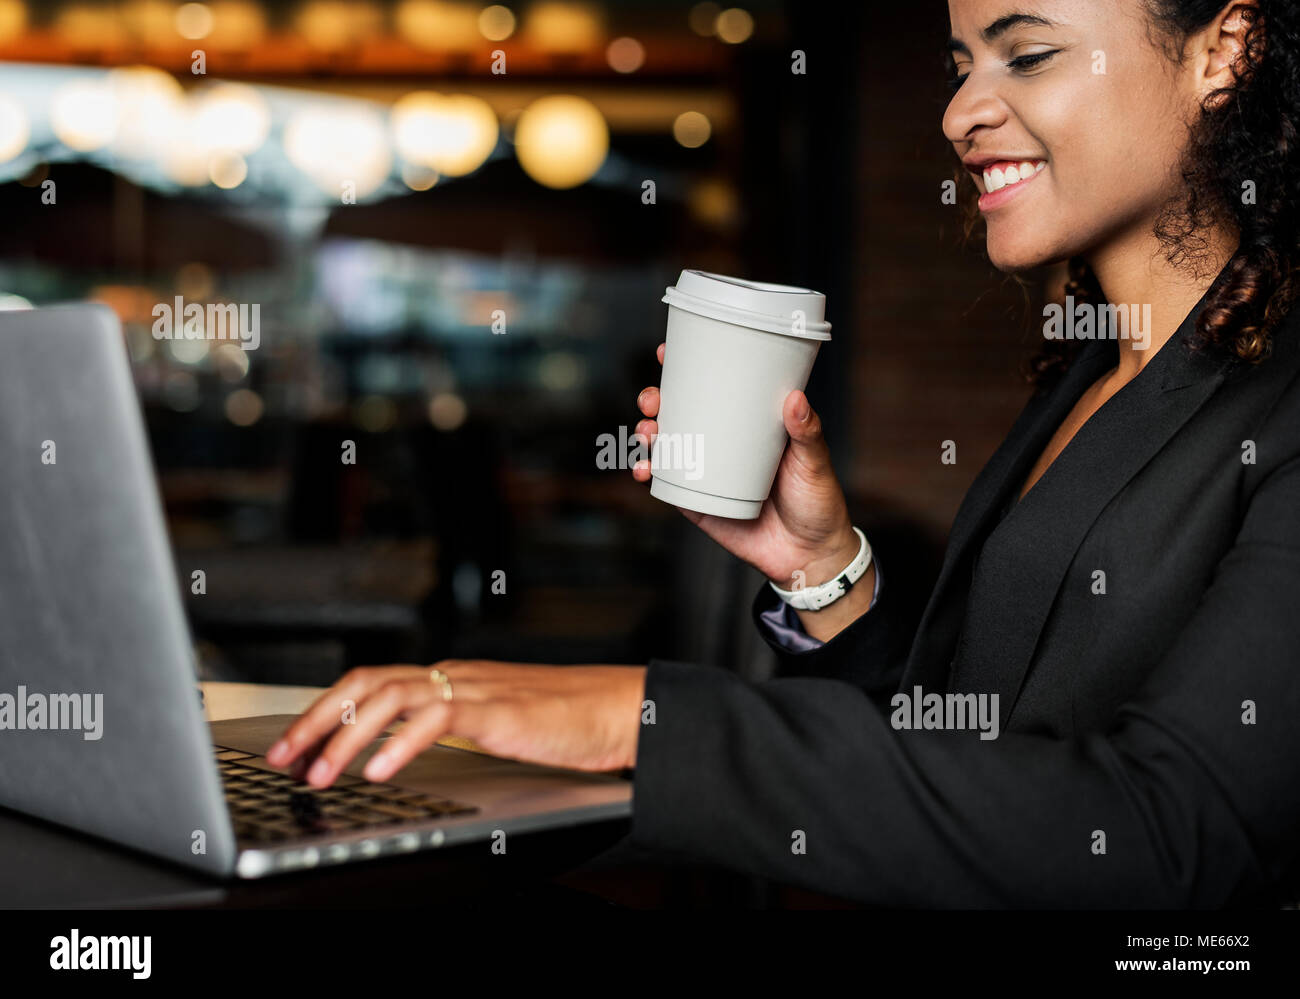 Woman working on a laptop Stock Photo